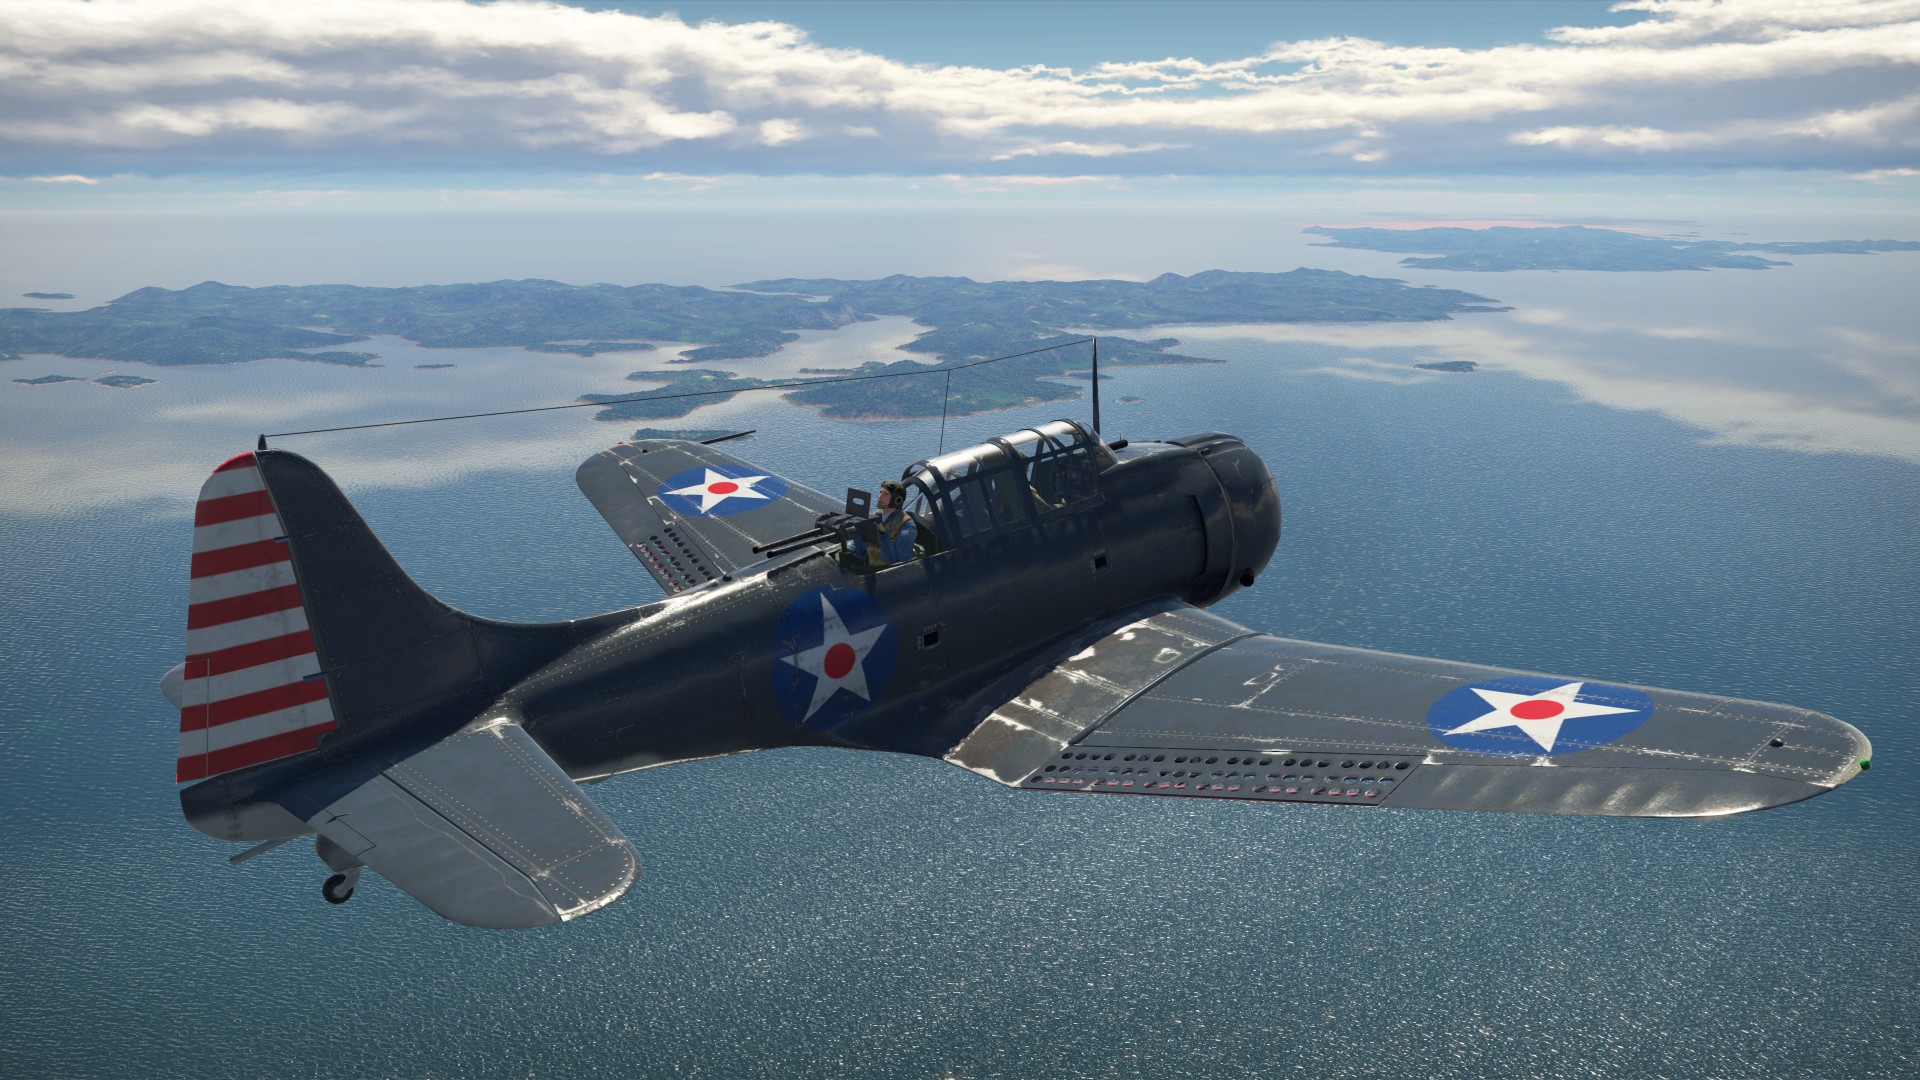 Profile Sbd Dauntless Slow But Deadly News War Thunder